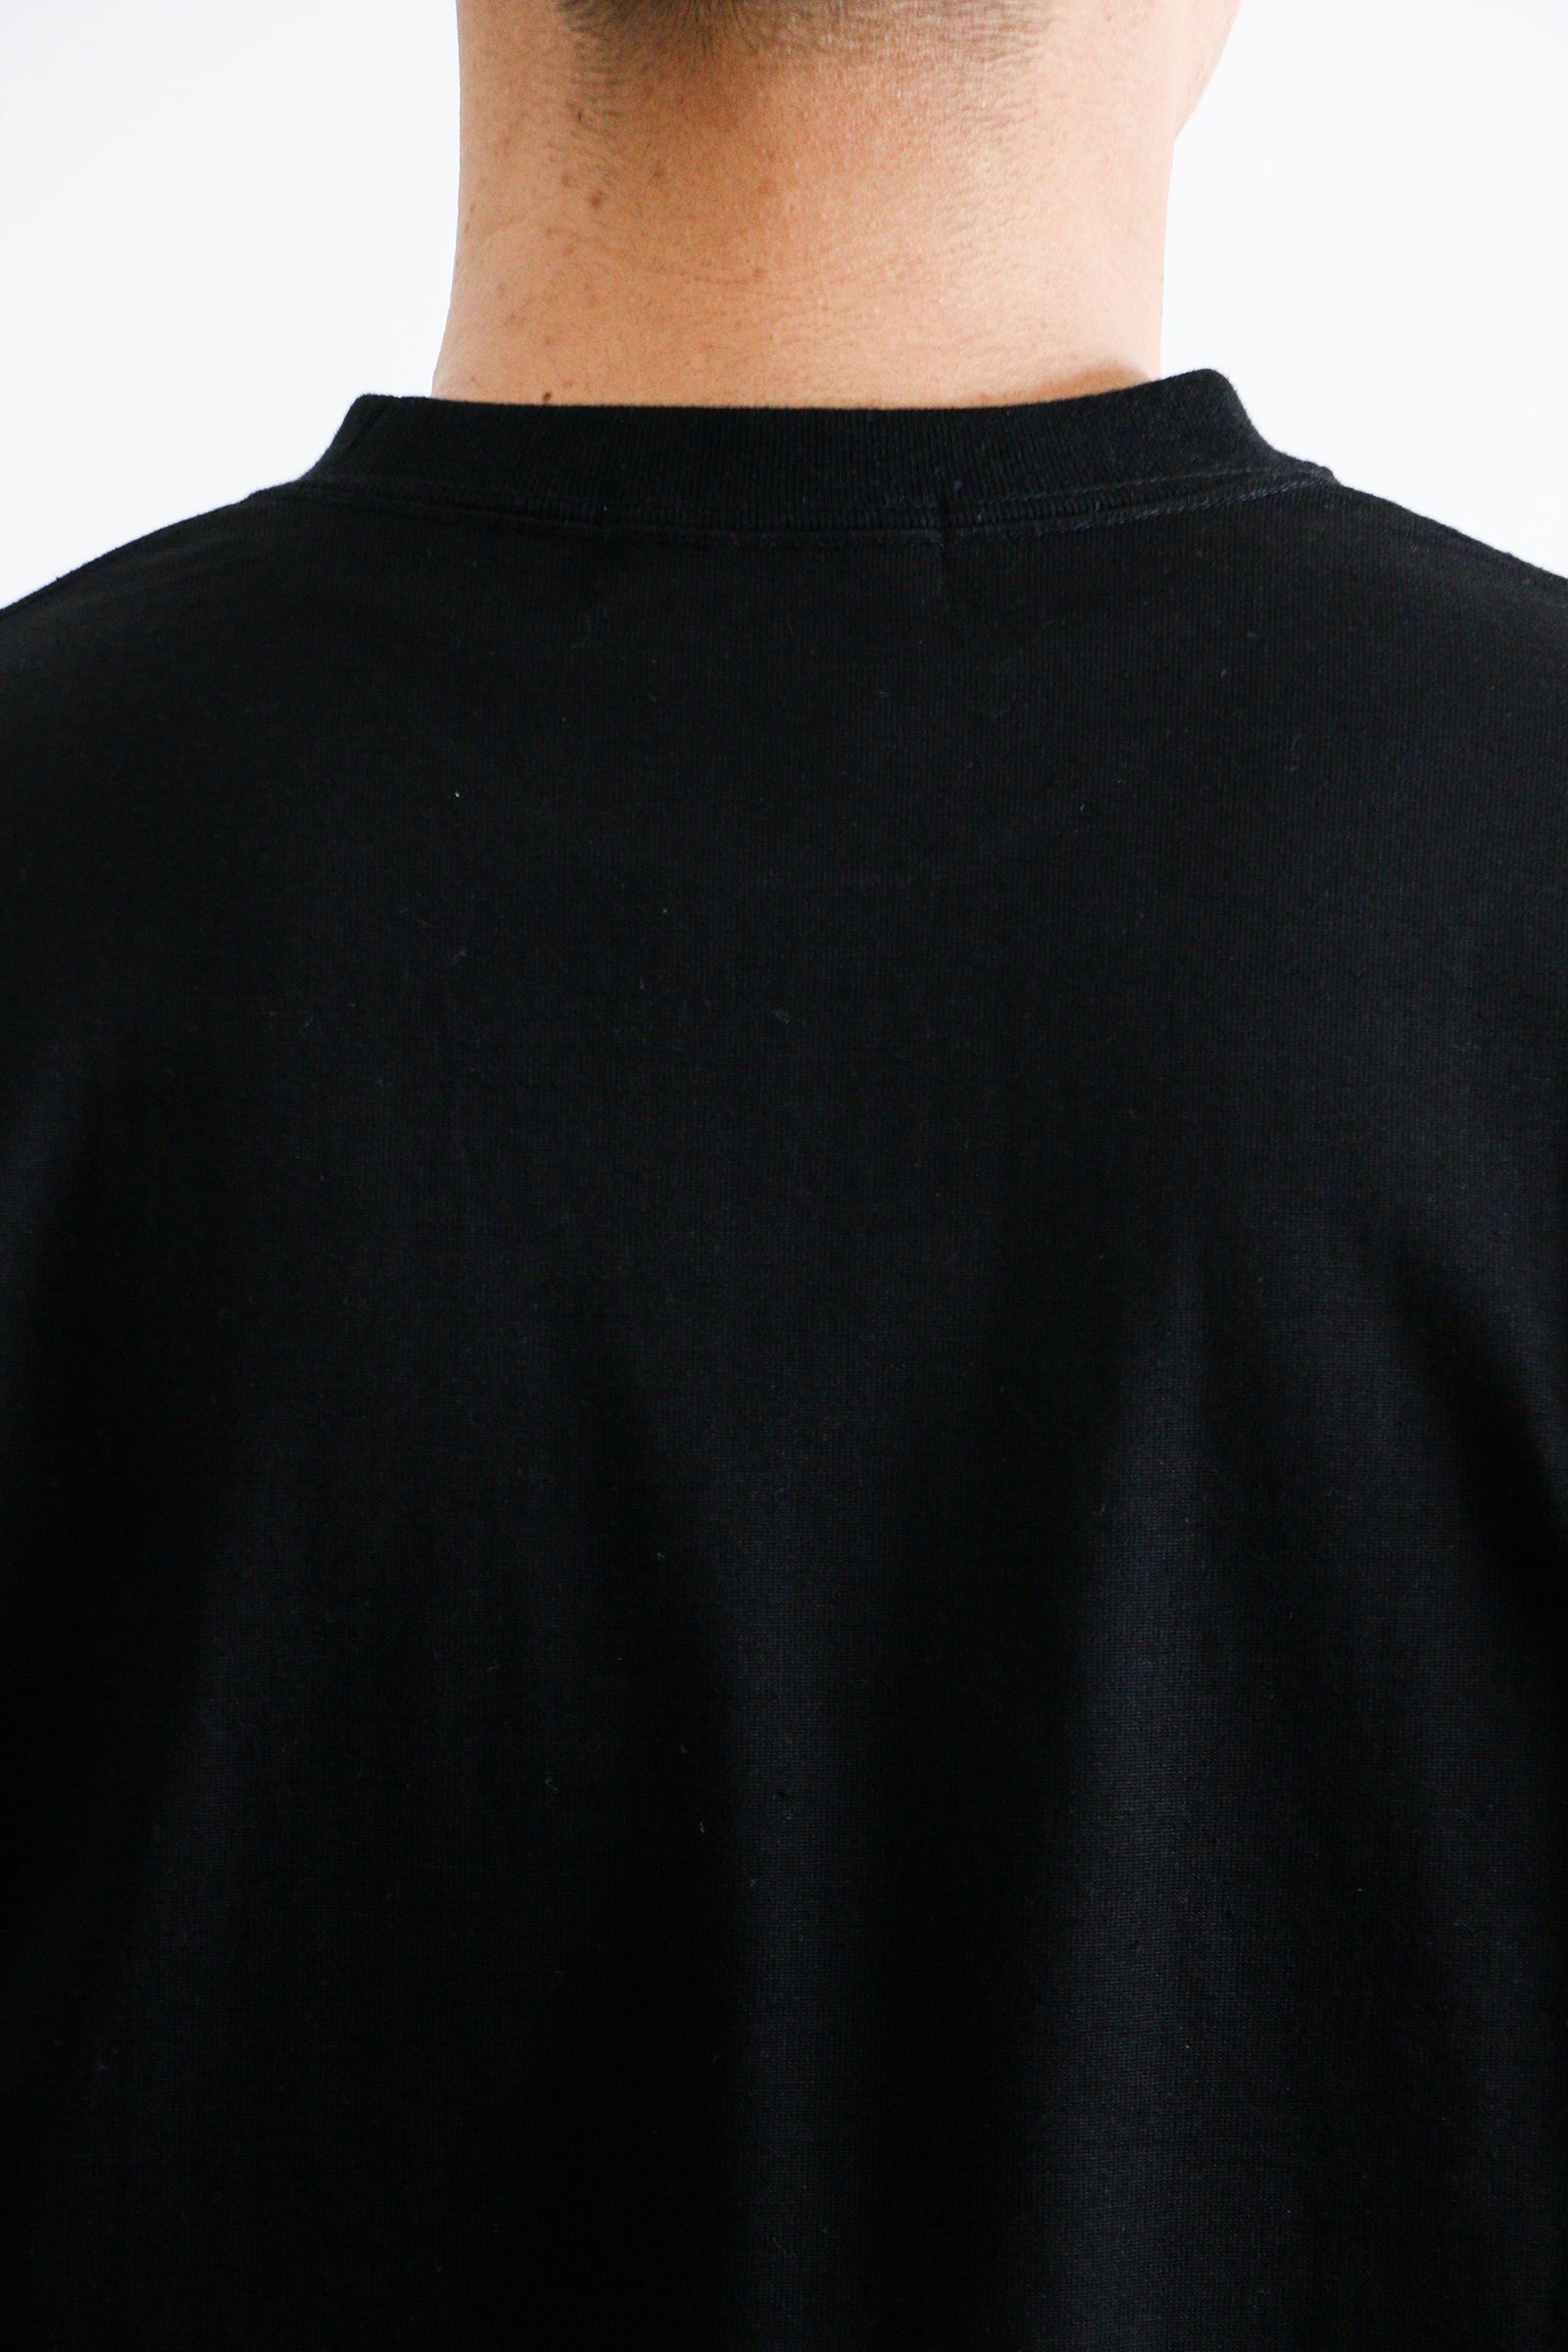 UNIVERSAL PRODUCTS YAAH HEAVY WEIGHT COTTON L/S T-SHIRT Black - 2